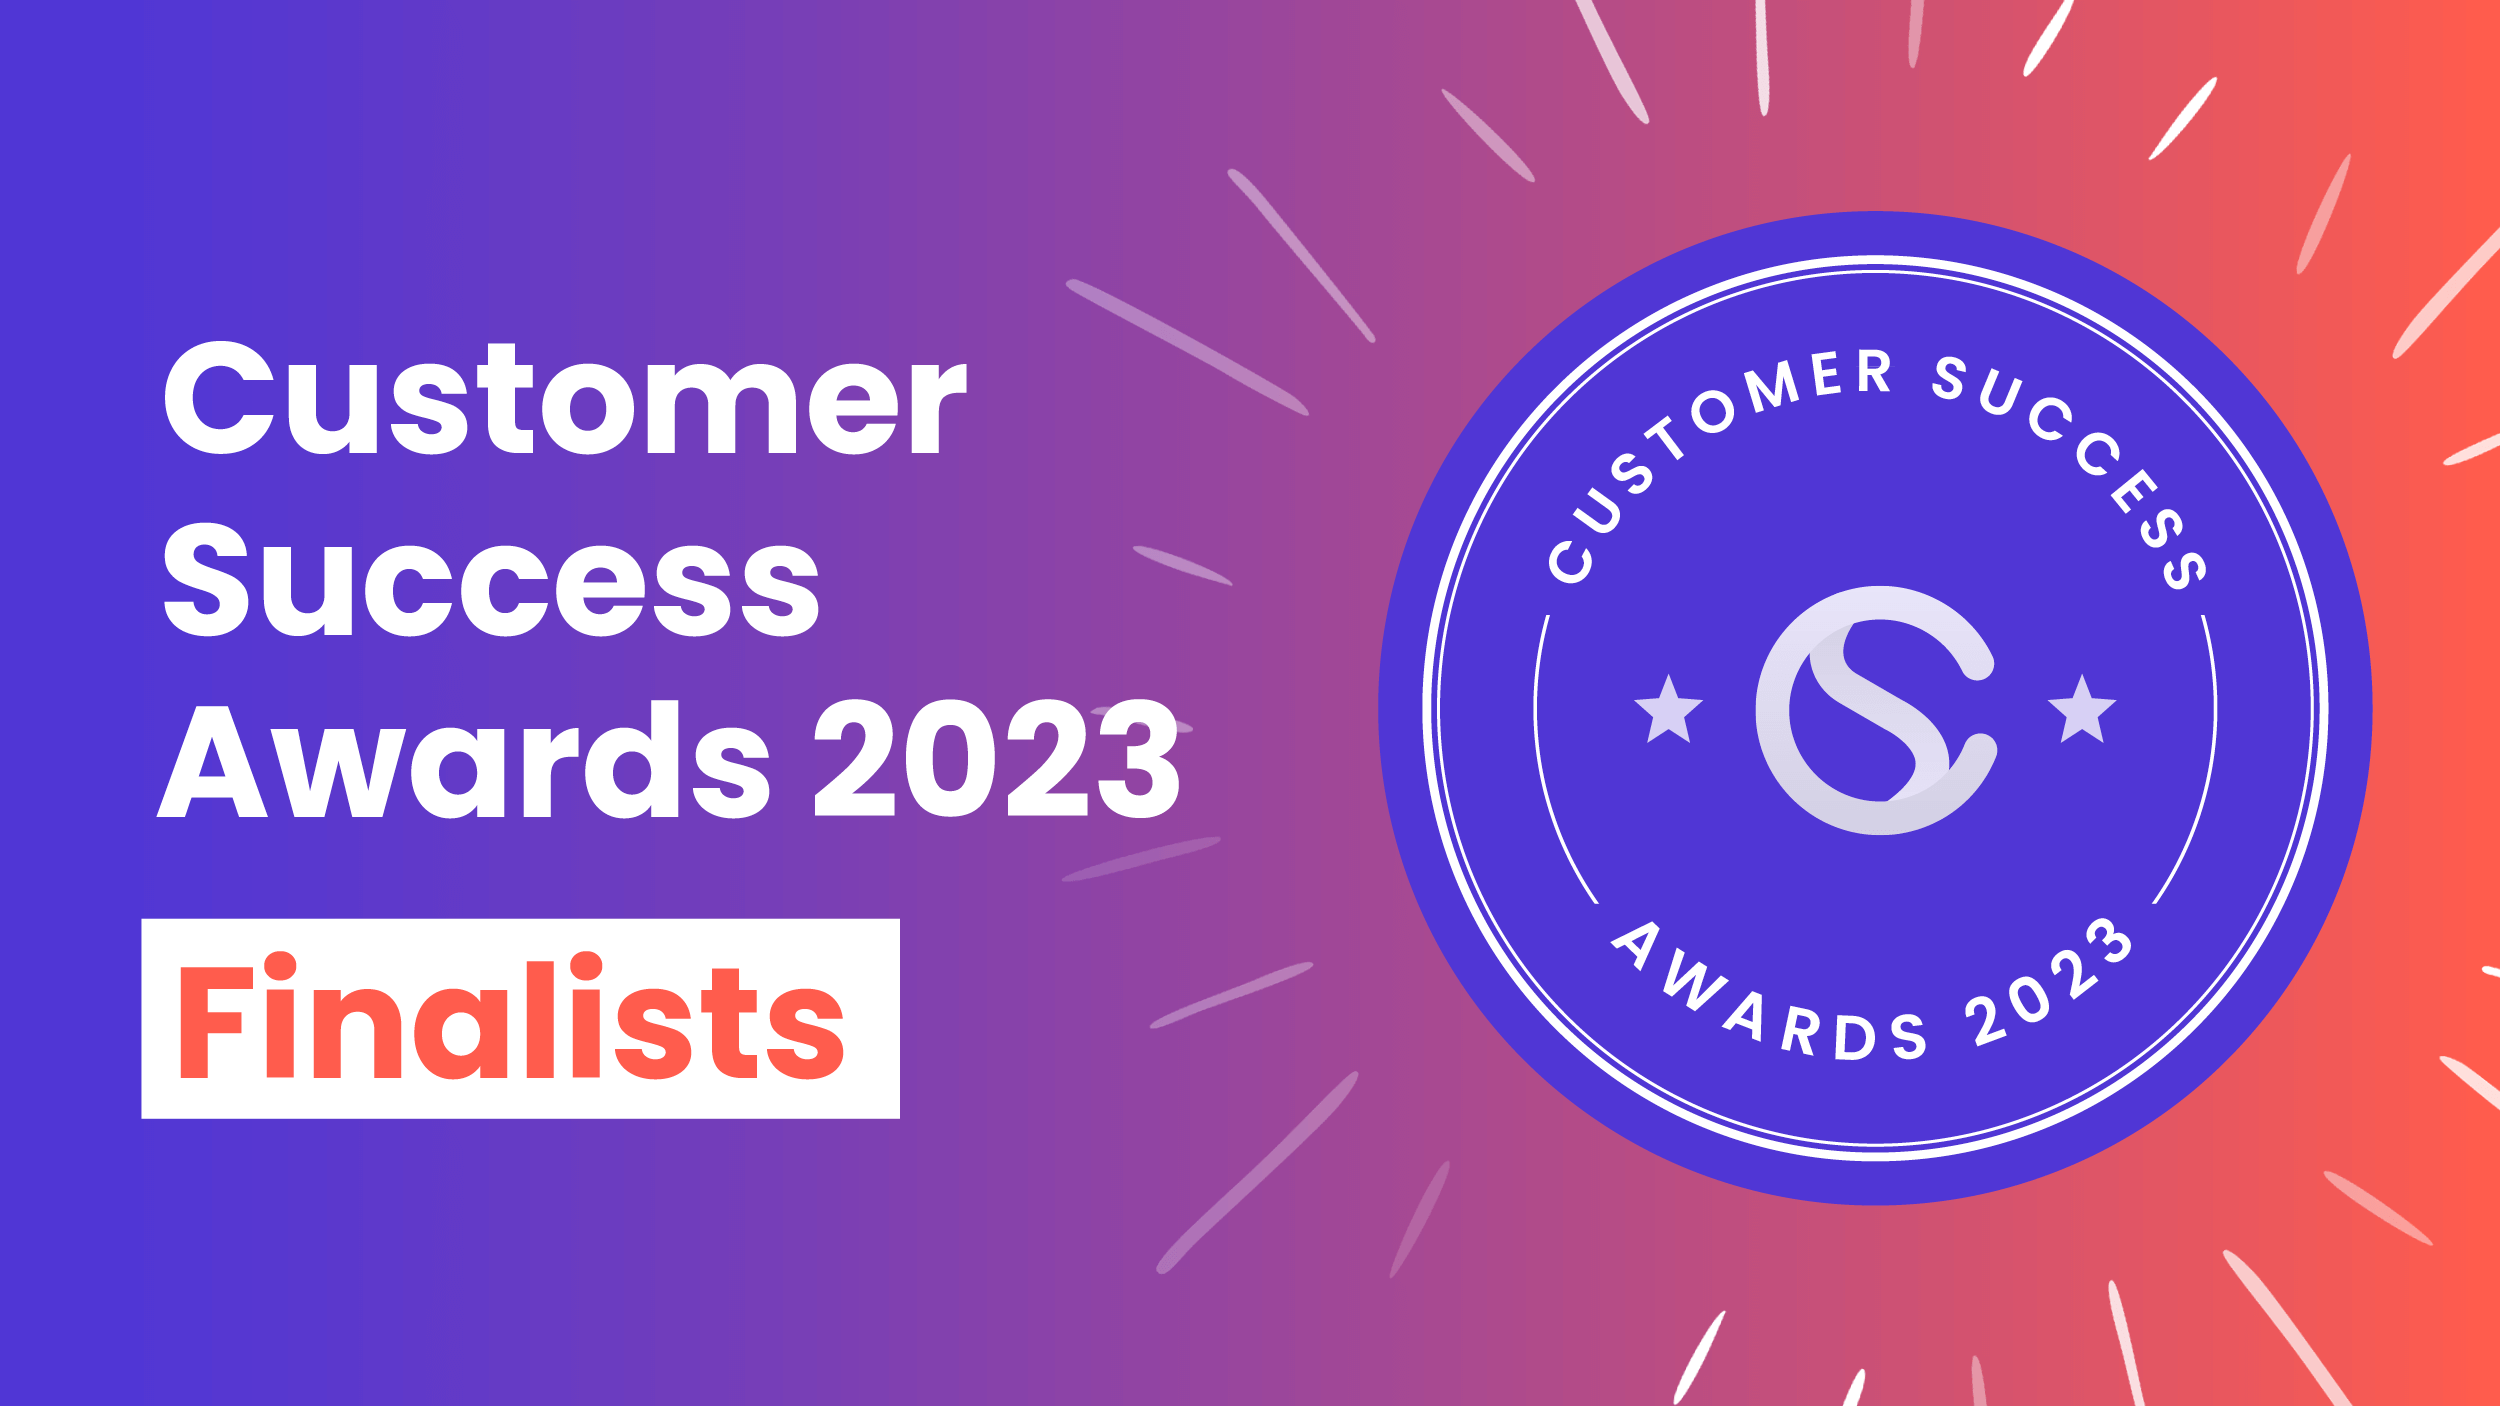 Introducing your finalists for the 2023 Customer Success Awards